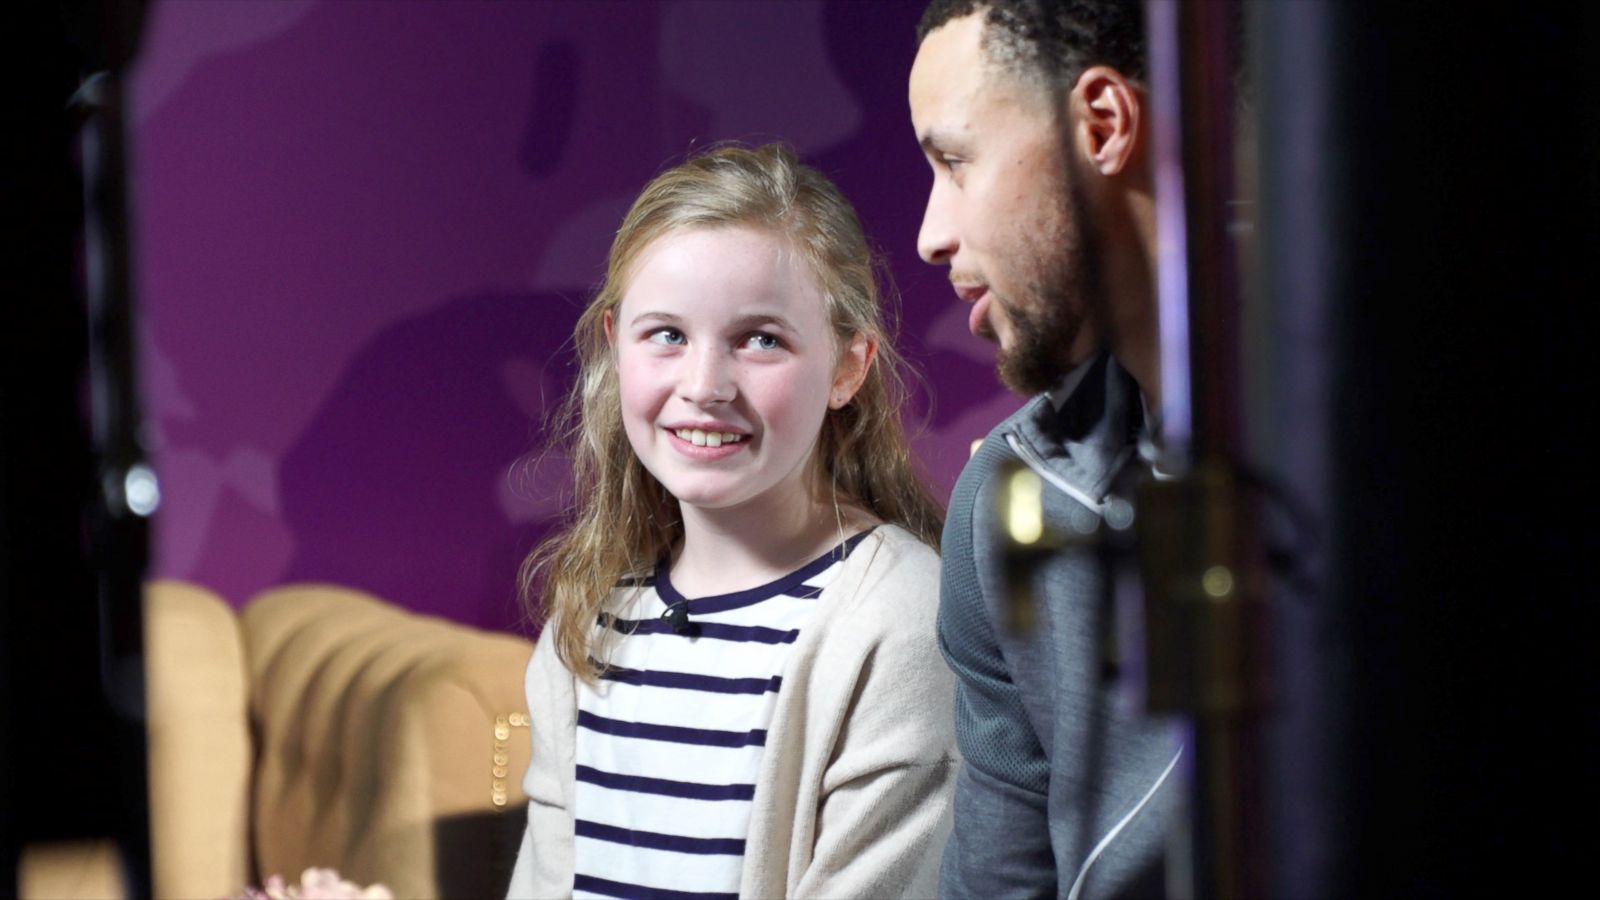 Stephen Curry surprises girl who 